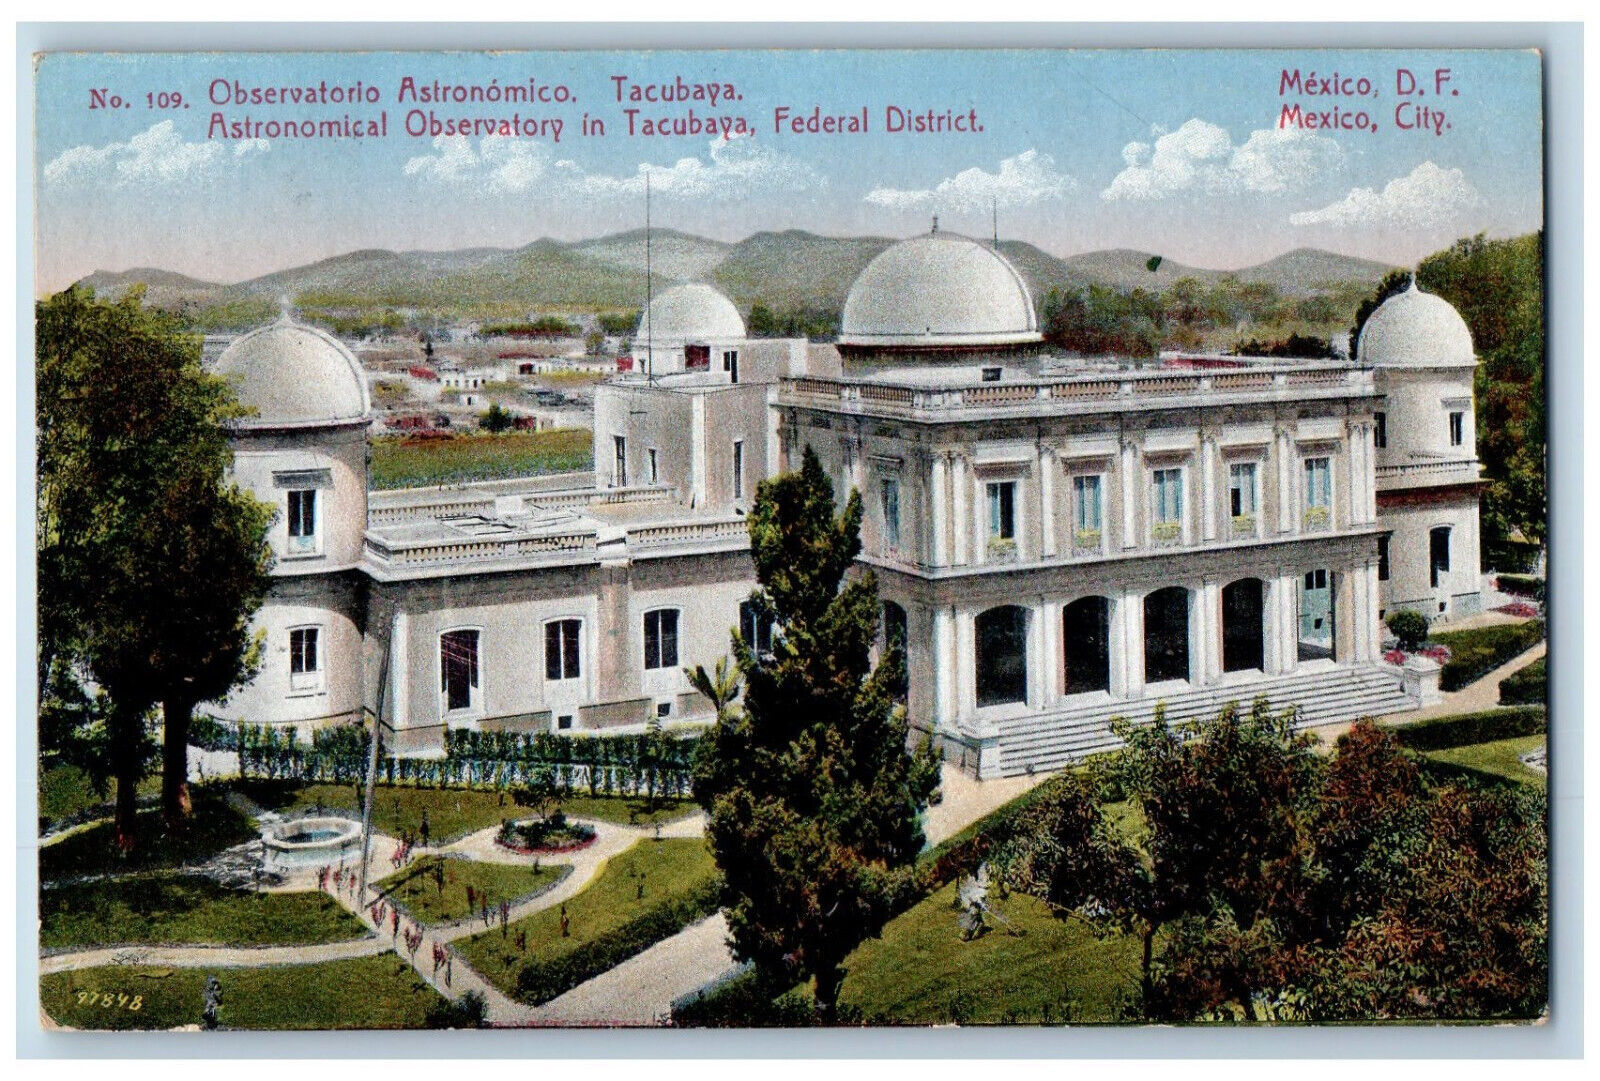 Mexico City Mexico Postcard Astronomical Observatory in Tacubaya 1928